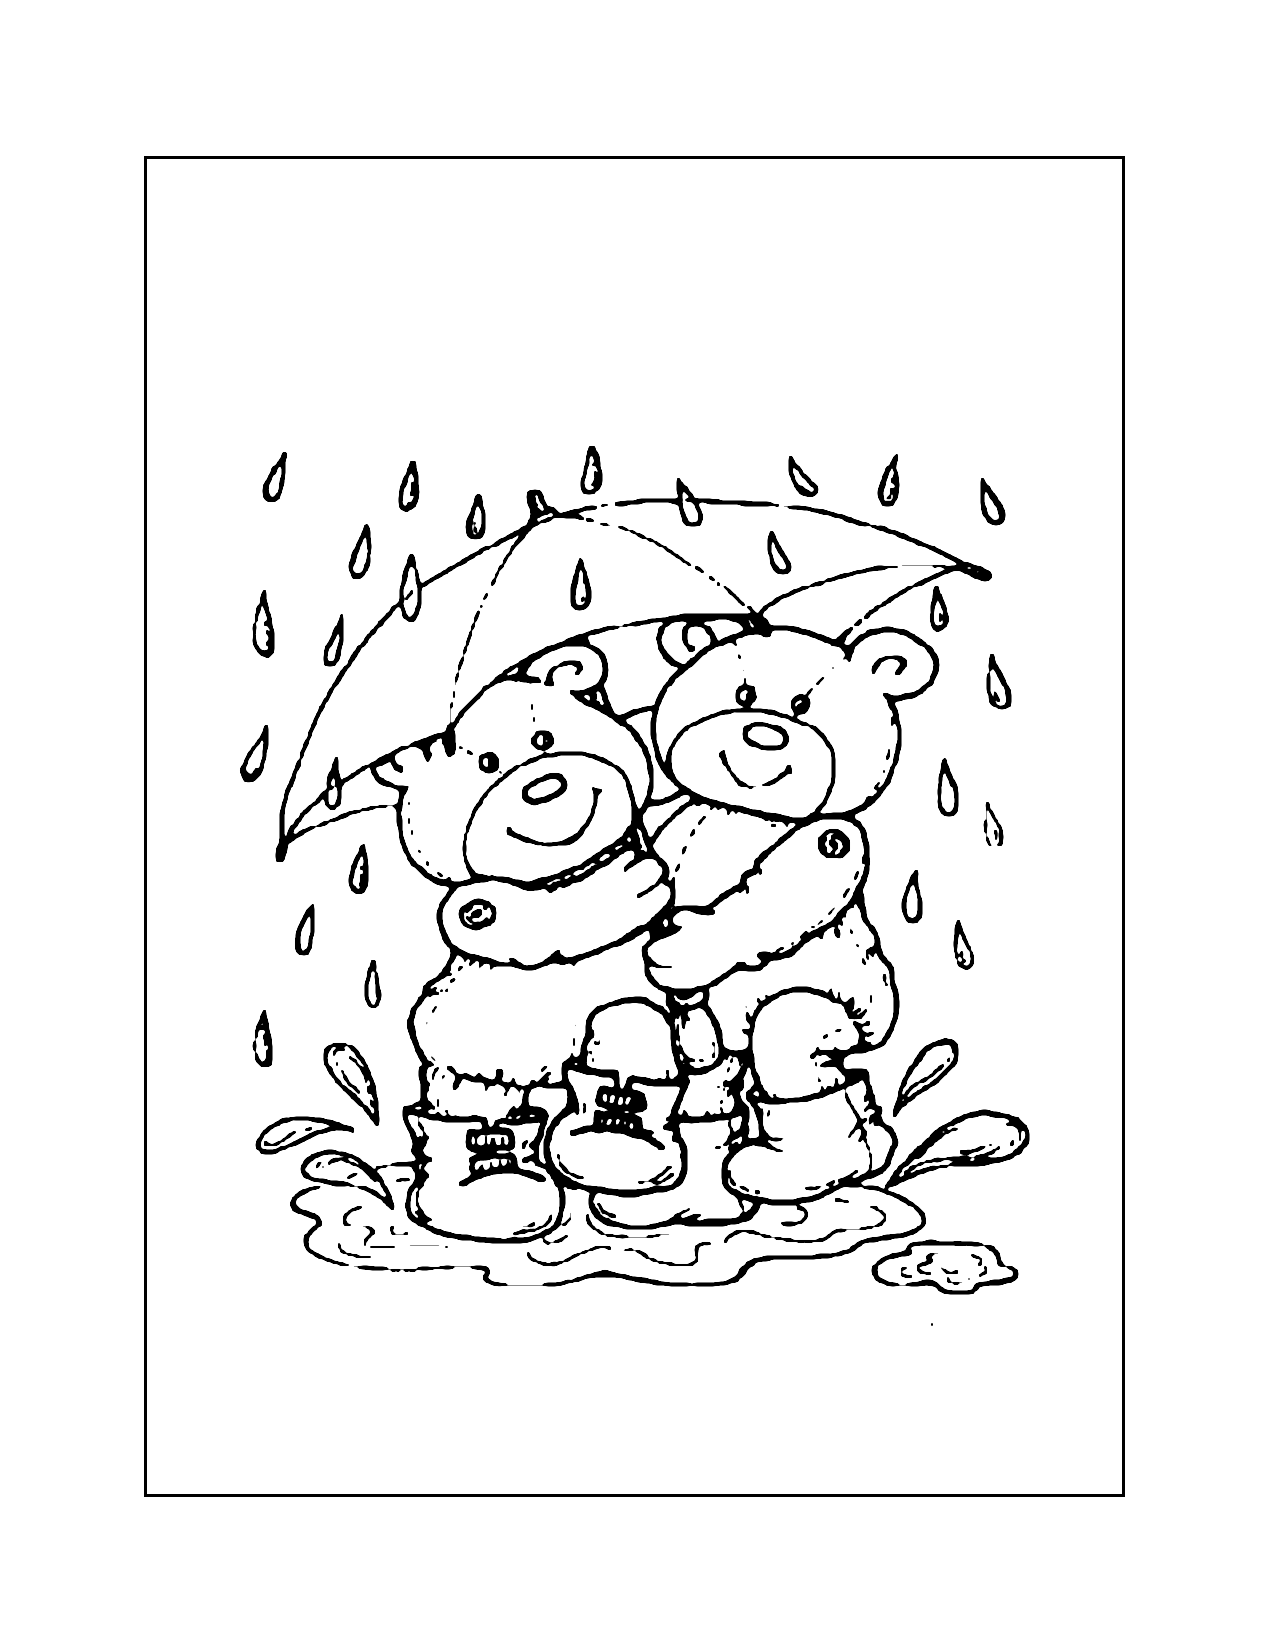 Teddy Bears In The Rain Coloring Page